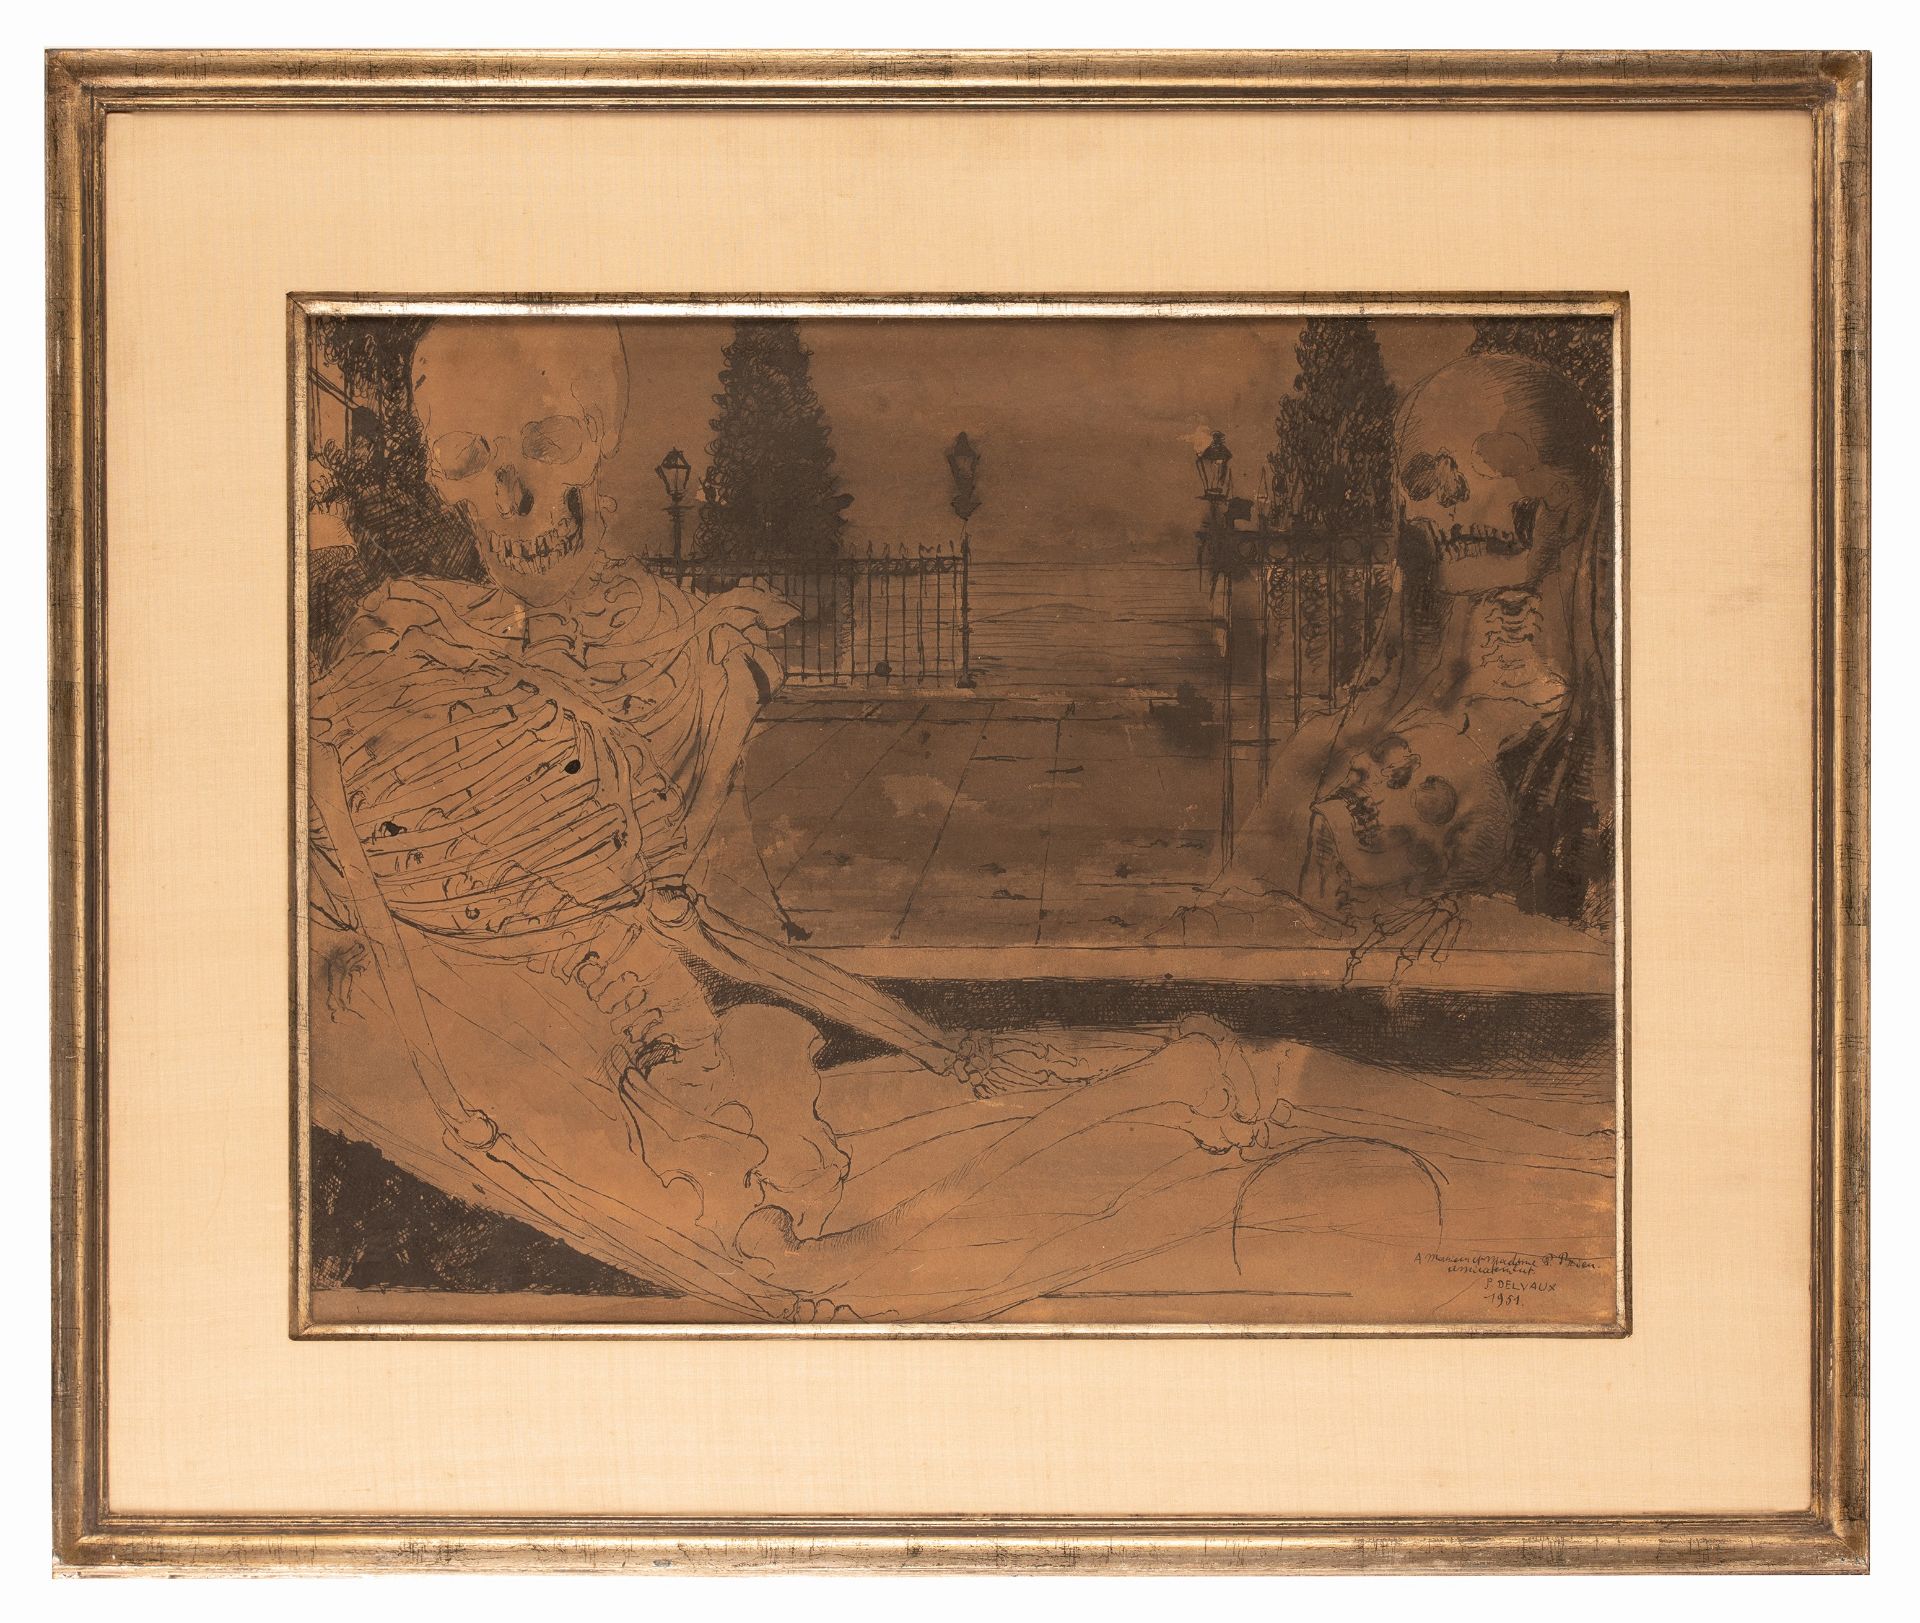 Paul Delvaux (1897-1994), Skeleton in odalisque pose, 1951, washed Indian ink drawing on paper, 40 x - Image 2 of 4